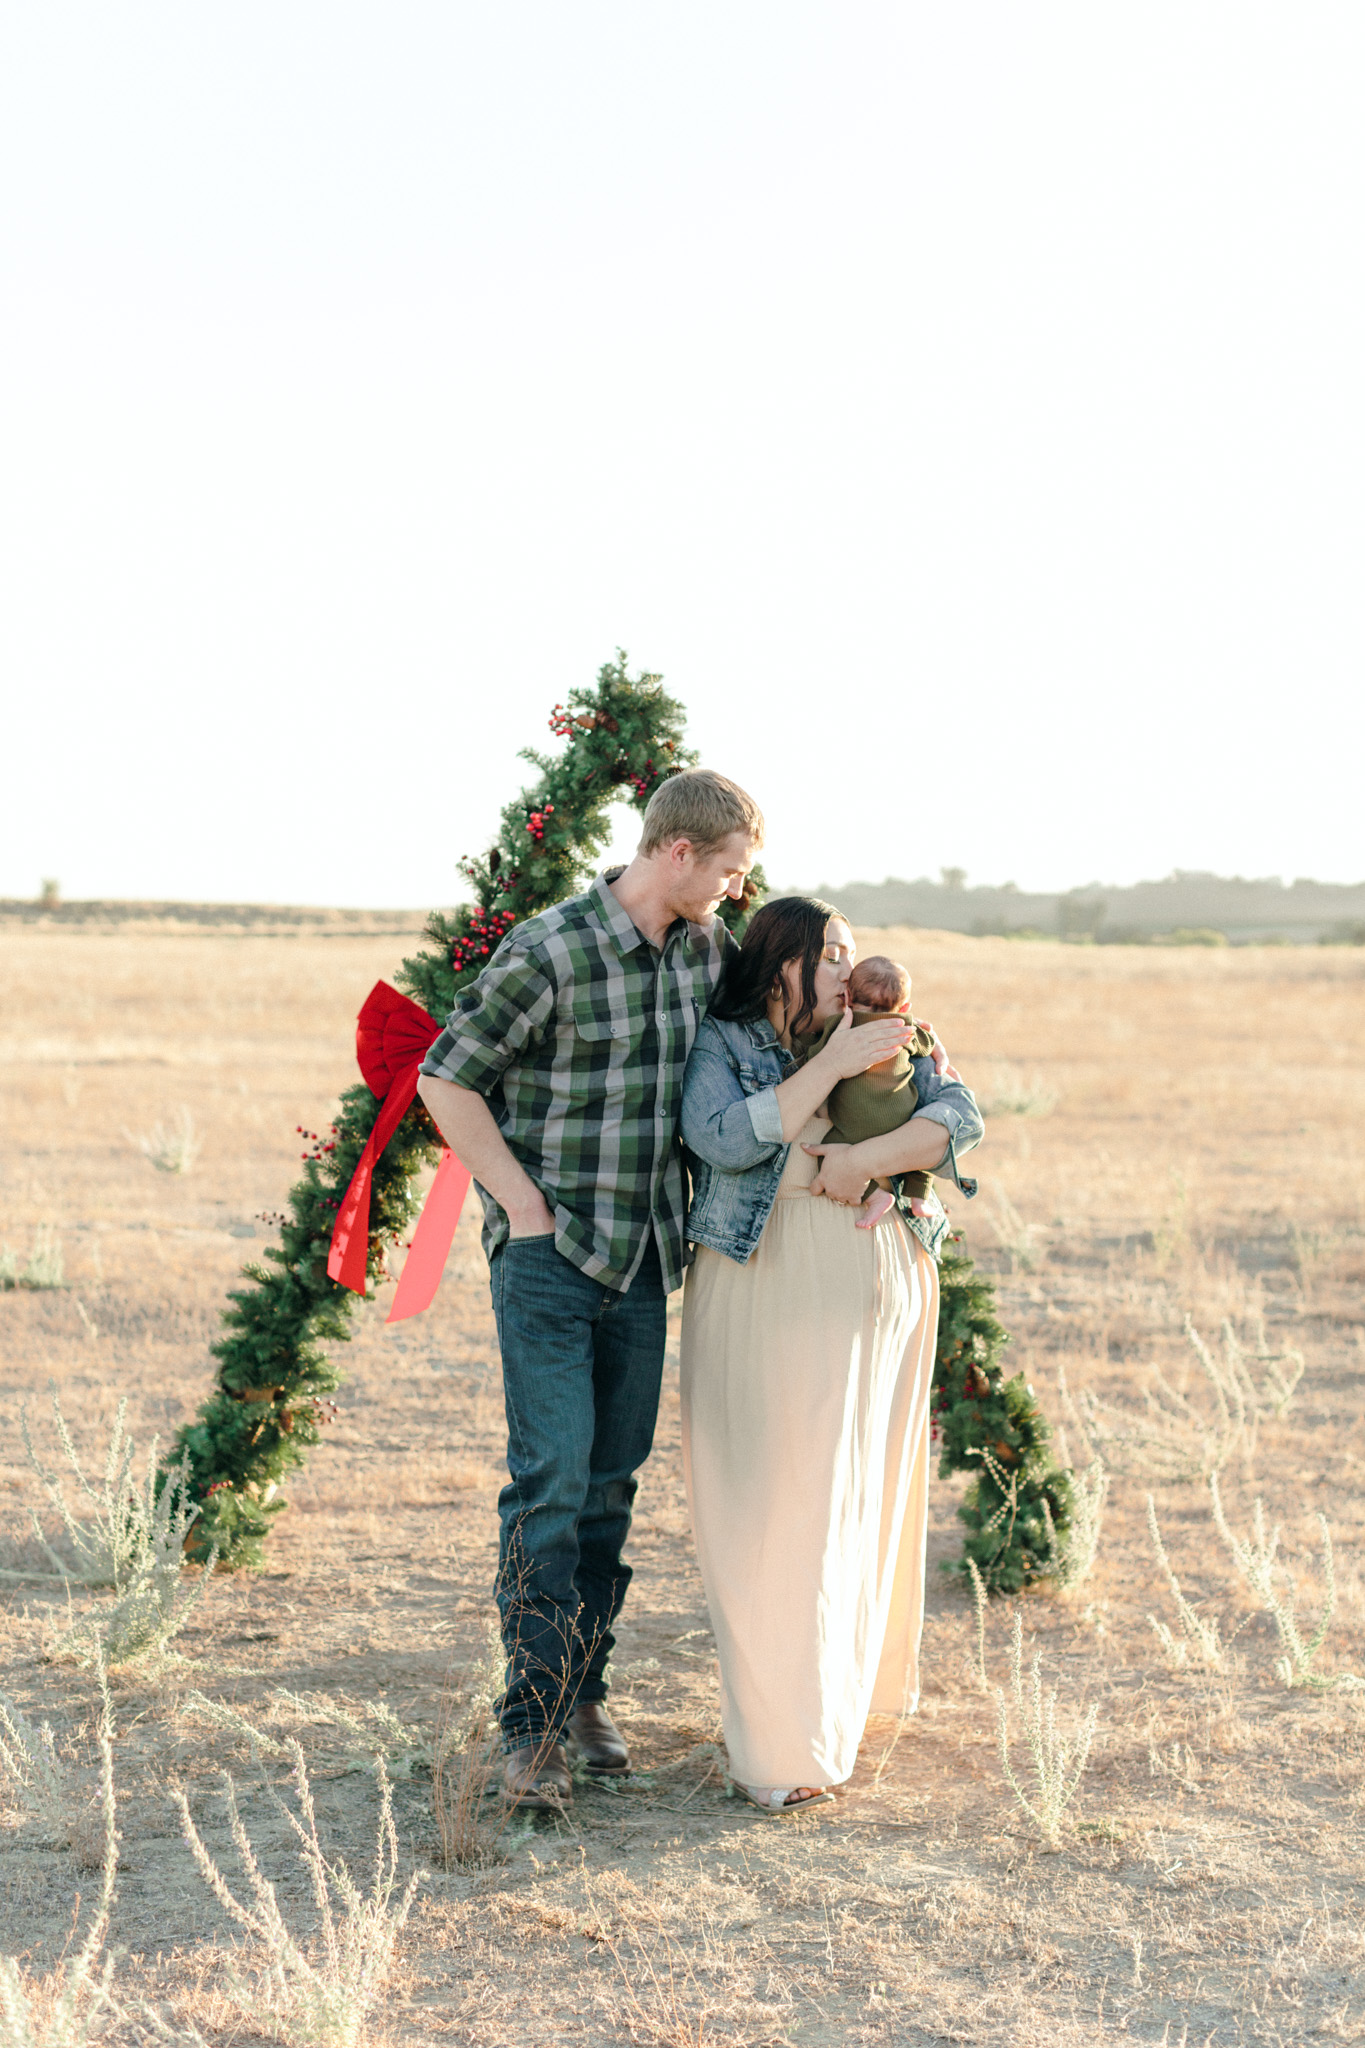 family photos in an open filed with a Christmas garland arch. Mother kisses the baby in her arms while the father watches 